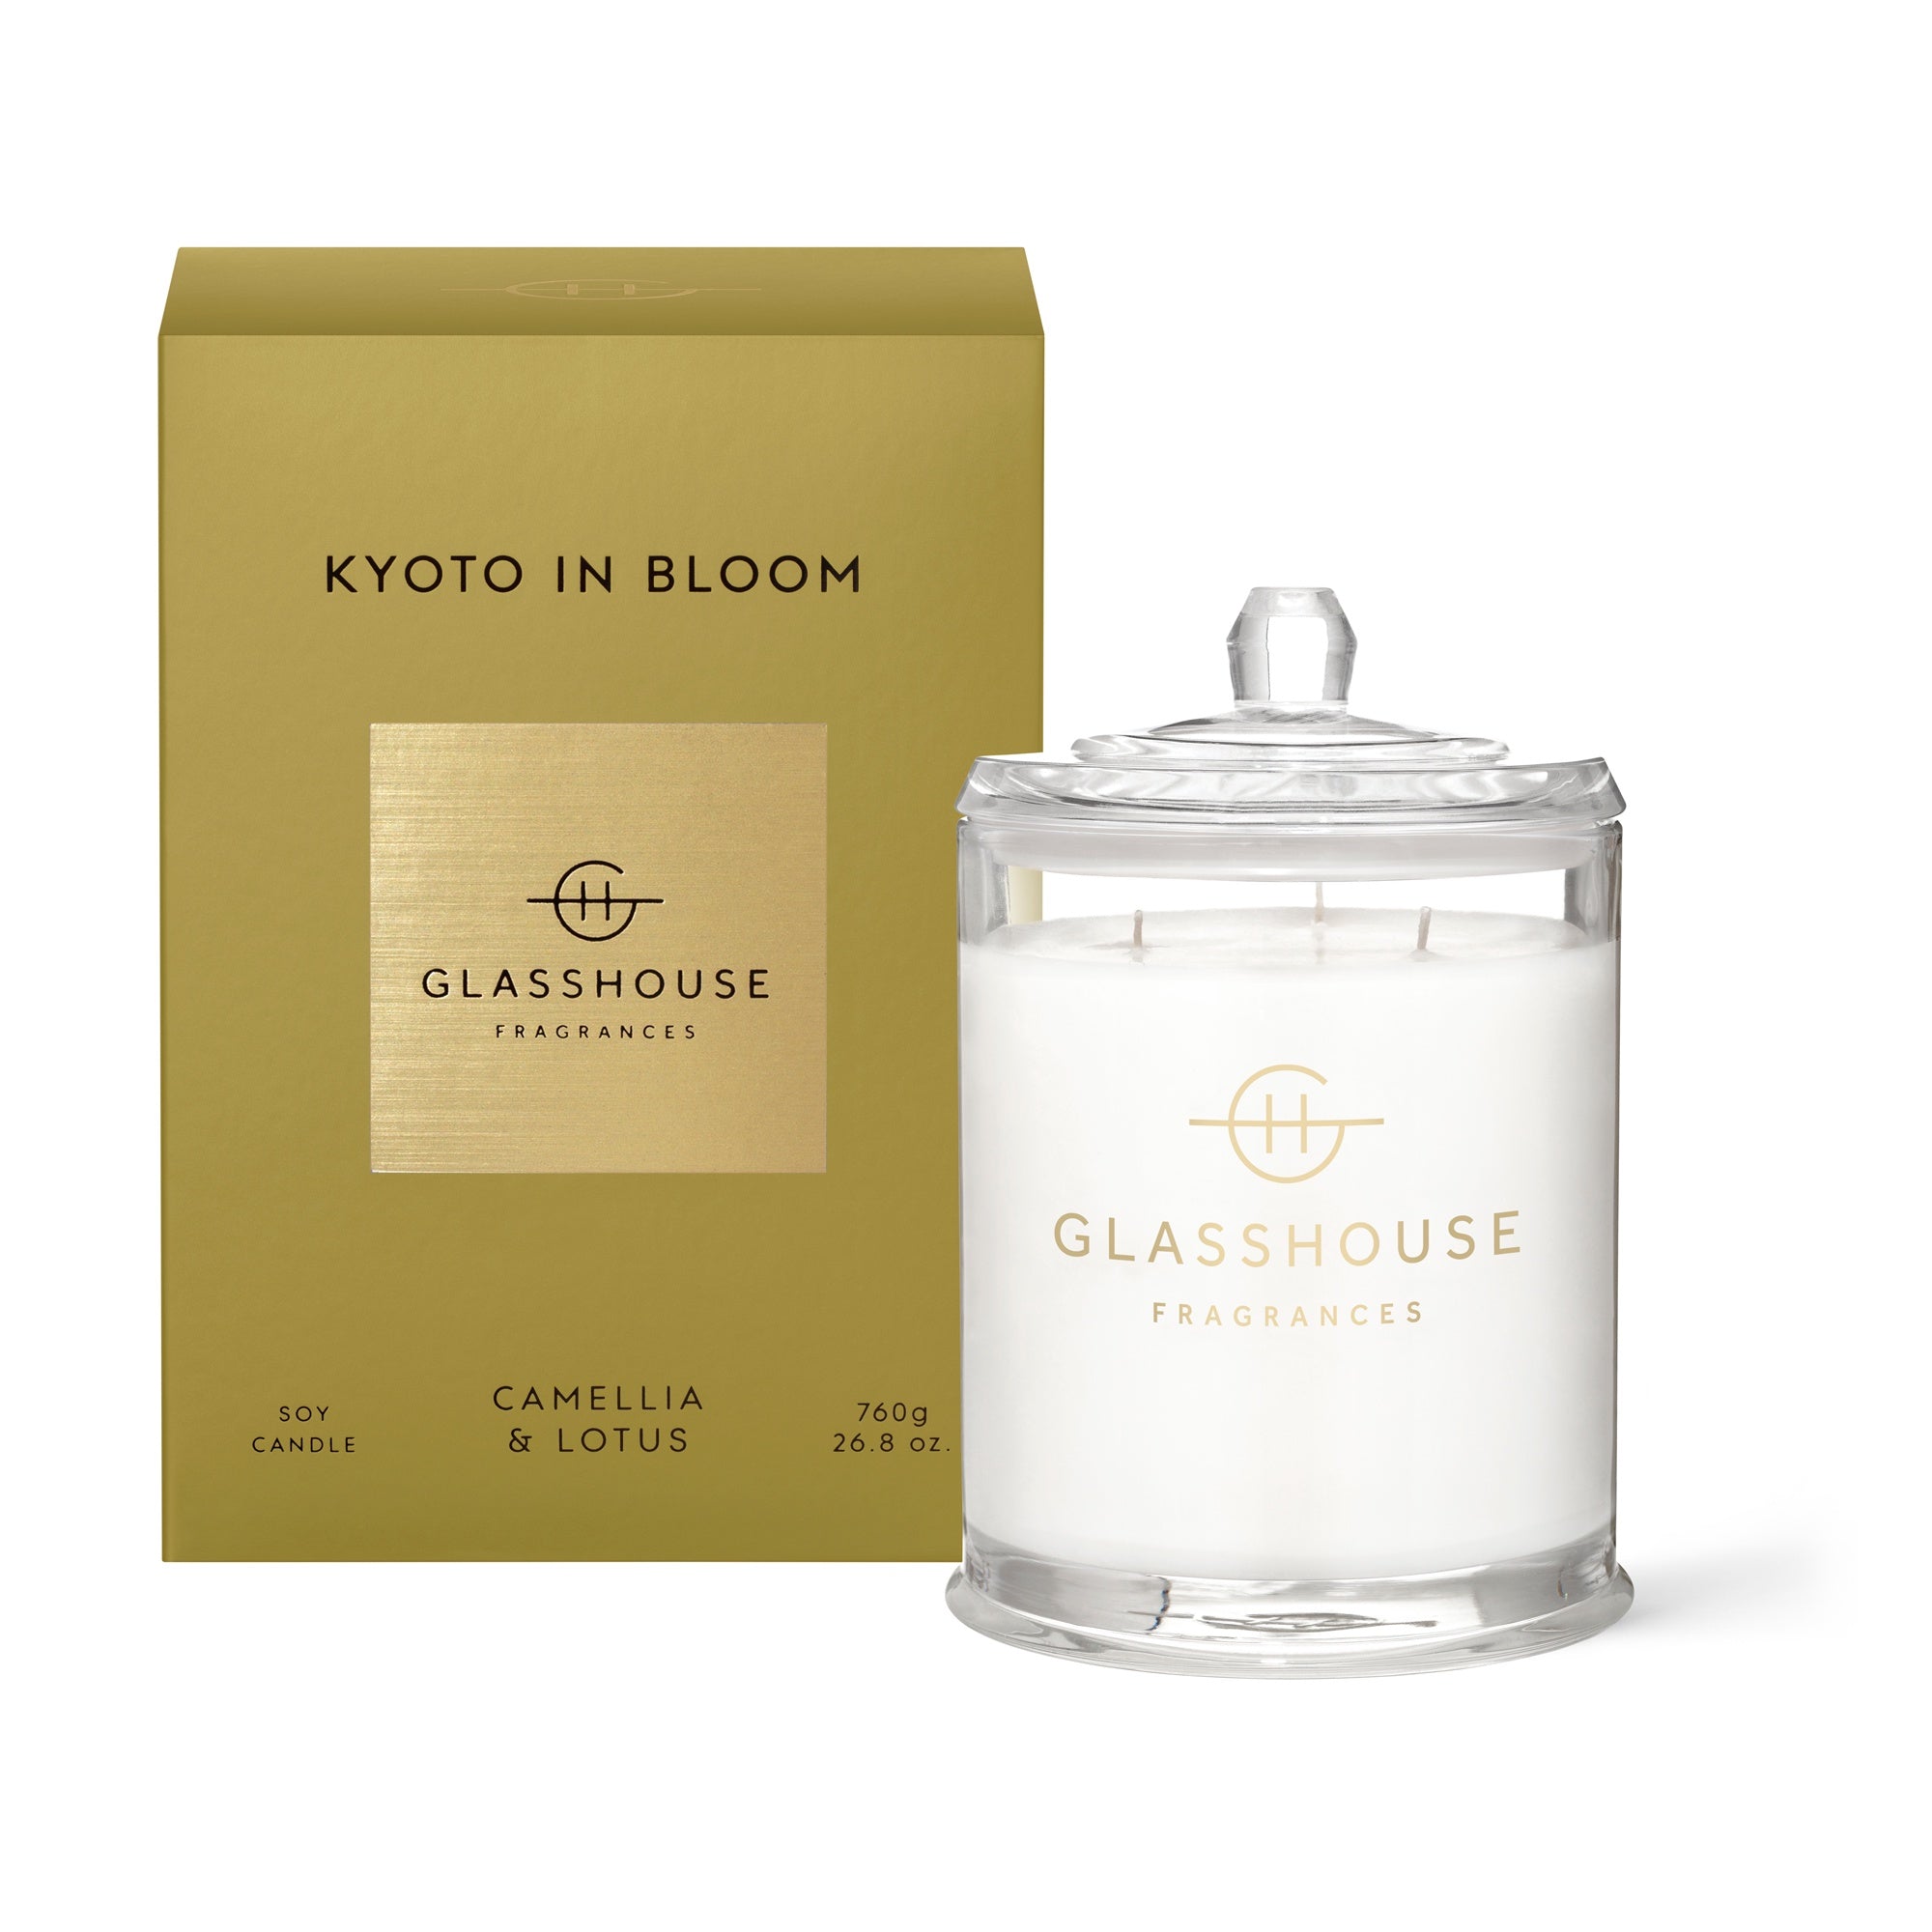 Kyoto in Bloom 760g Candle